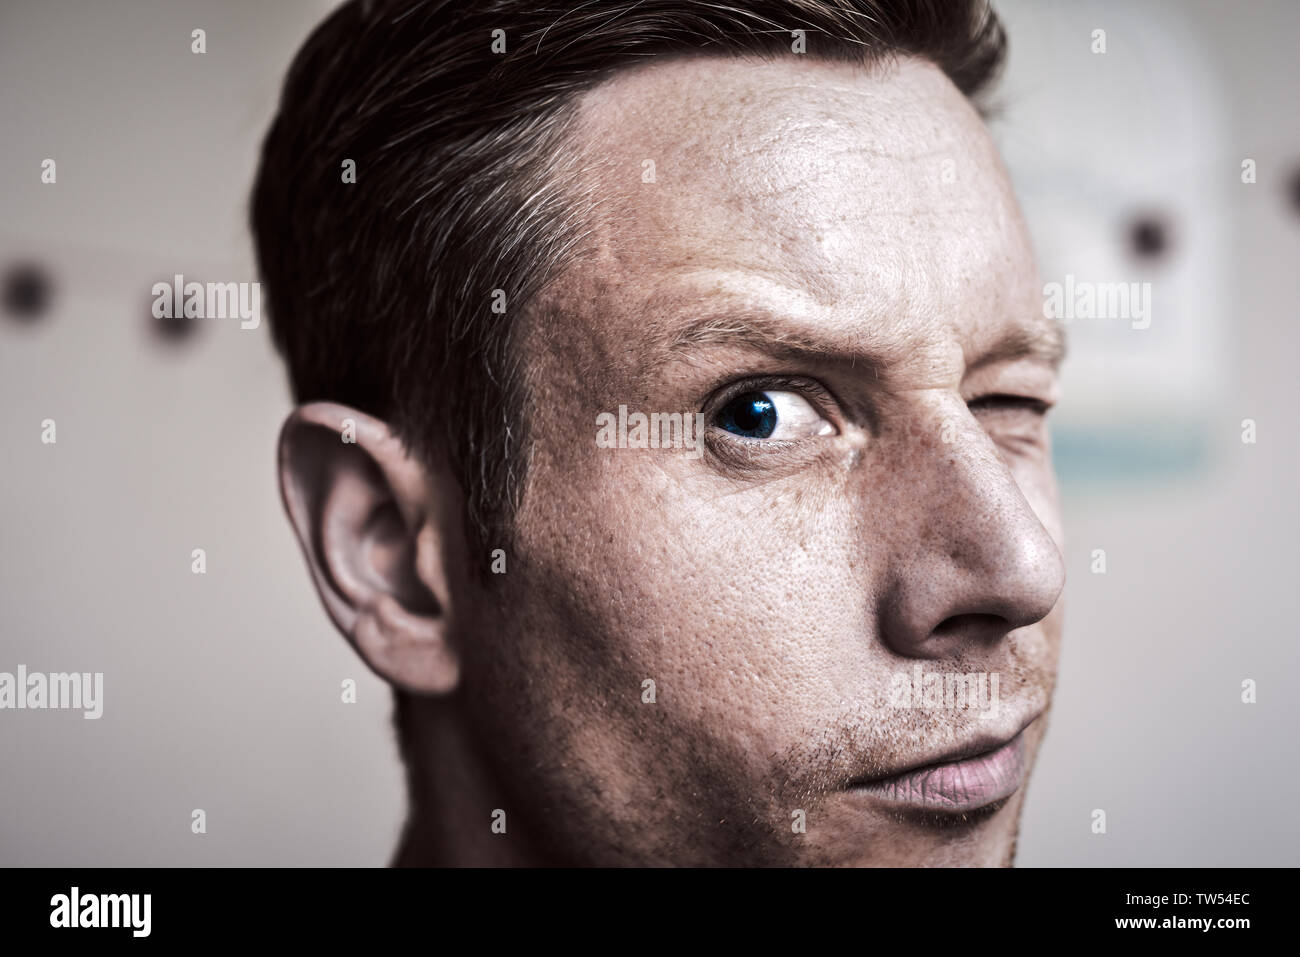 Serious but inquisitive looking man looking directly at camera Stock Photo